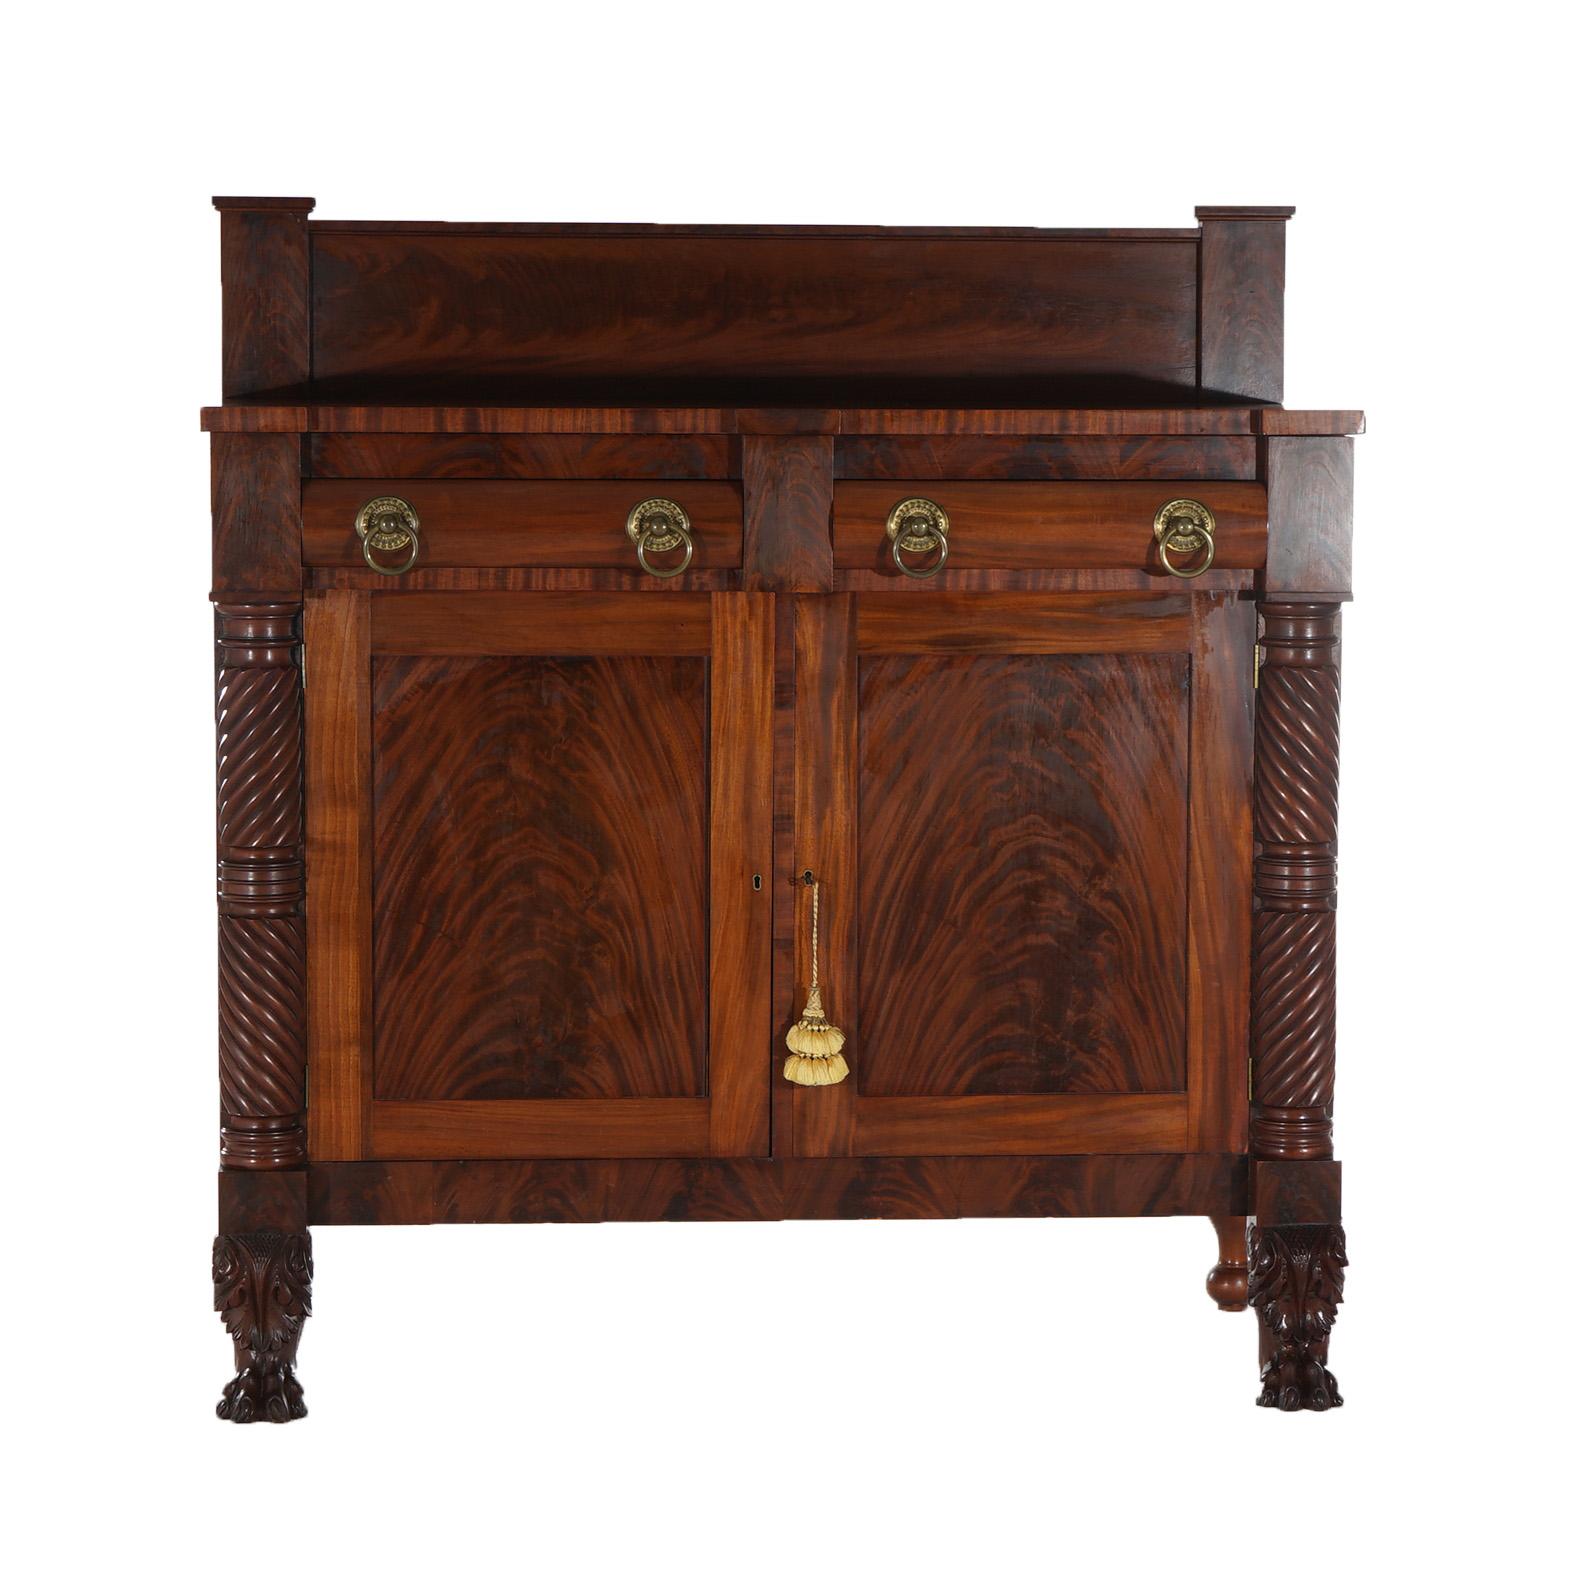 19th Century Antique American Empire Flame Mahogany Marble Top Linen Press Sideboard C1840 For Sale